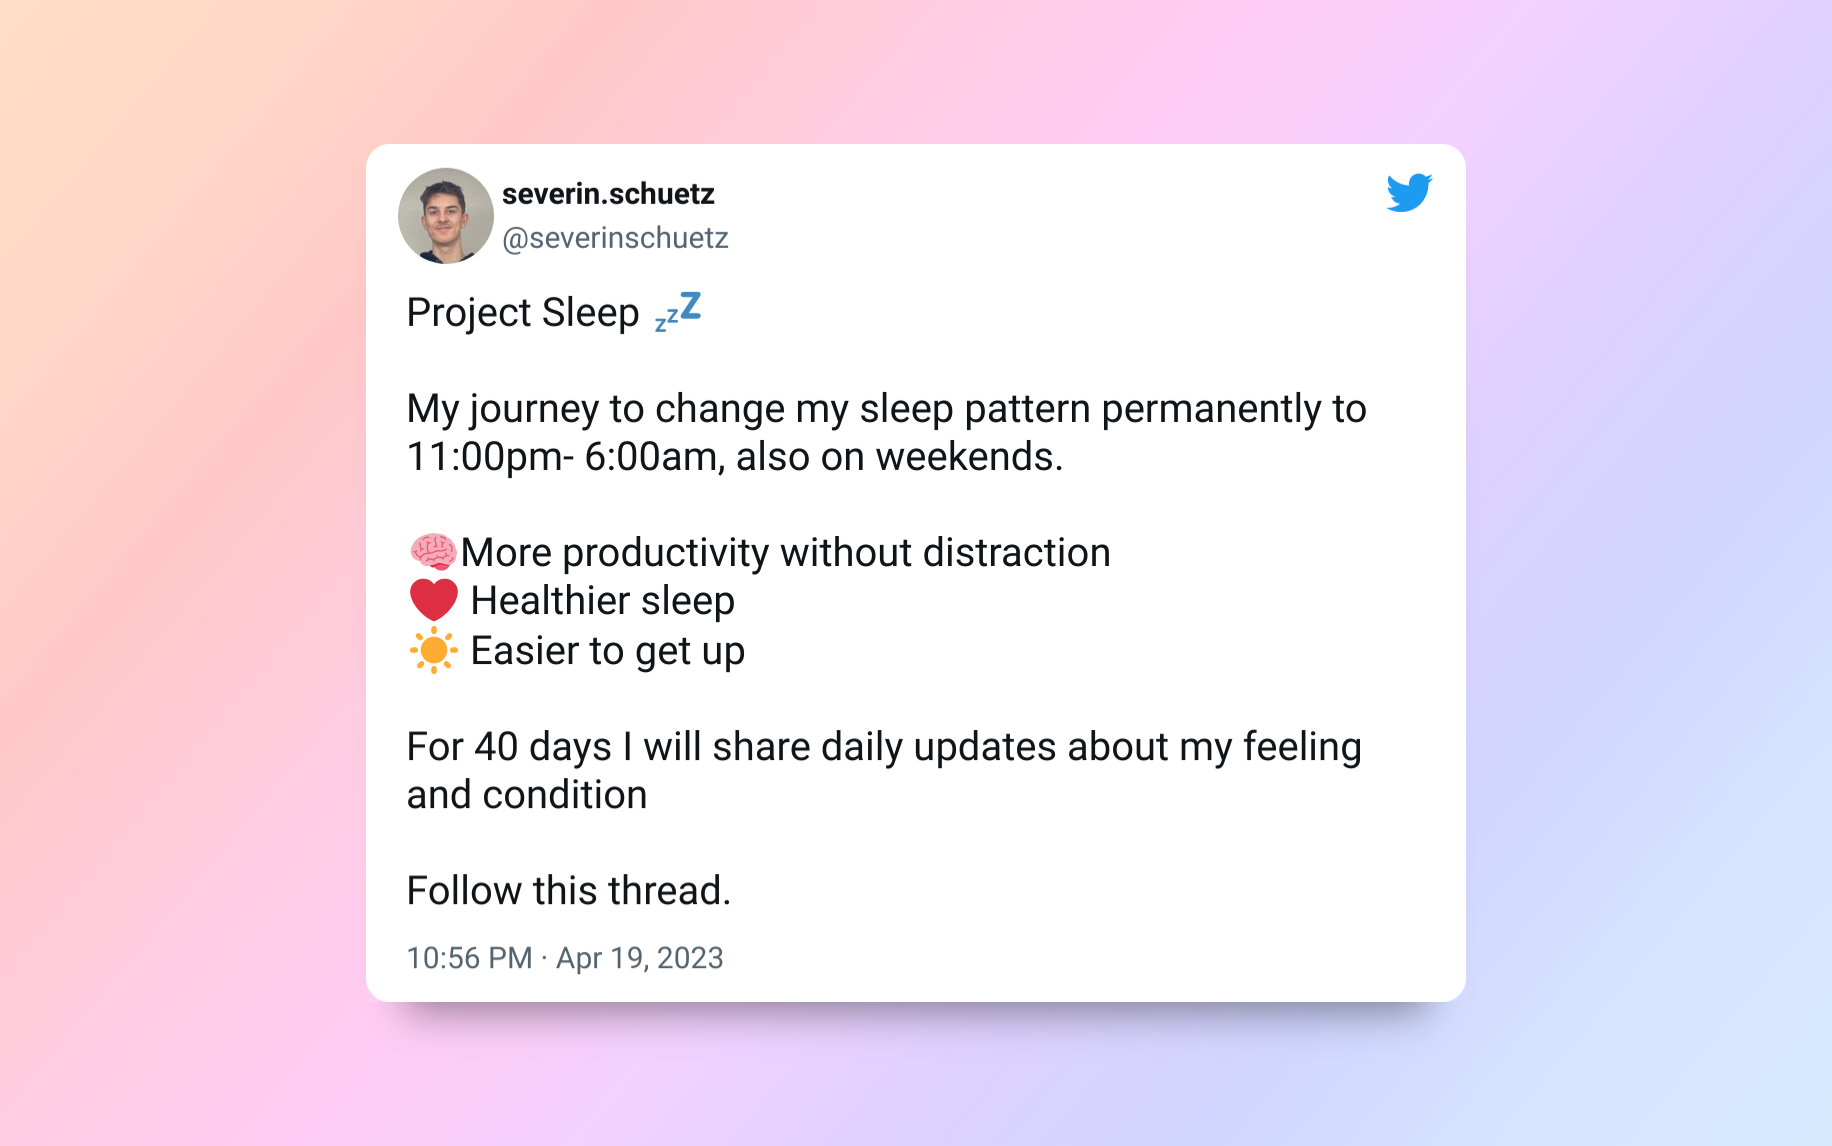 Tweet: Project Sleep. My journey to change my sleep pattern permanently to 11:00pm- 6:00am, also on weekends.